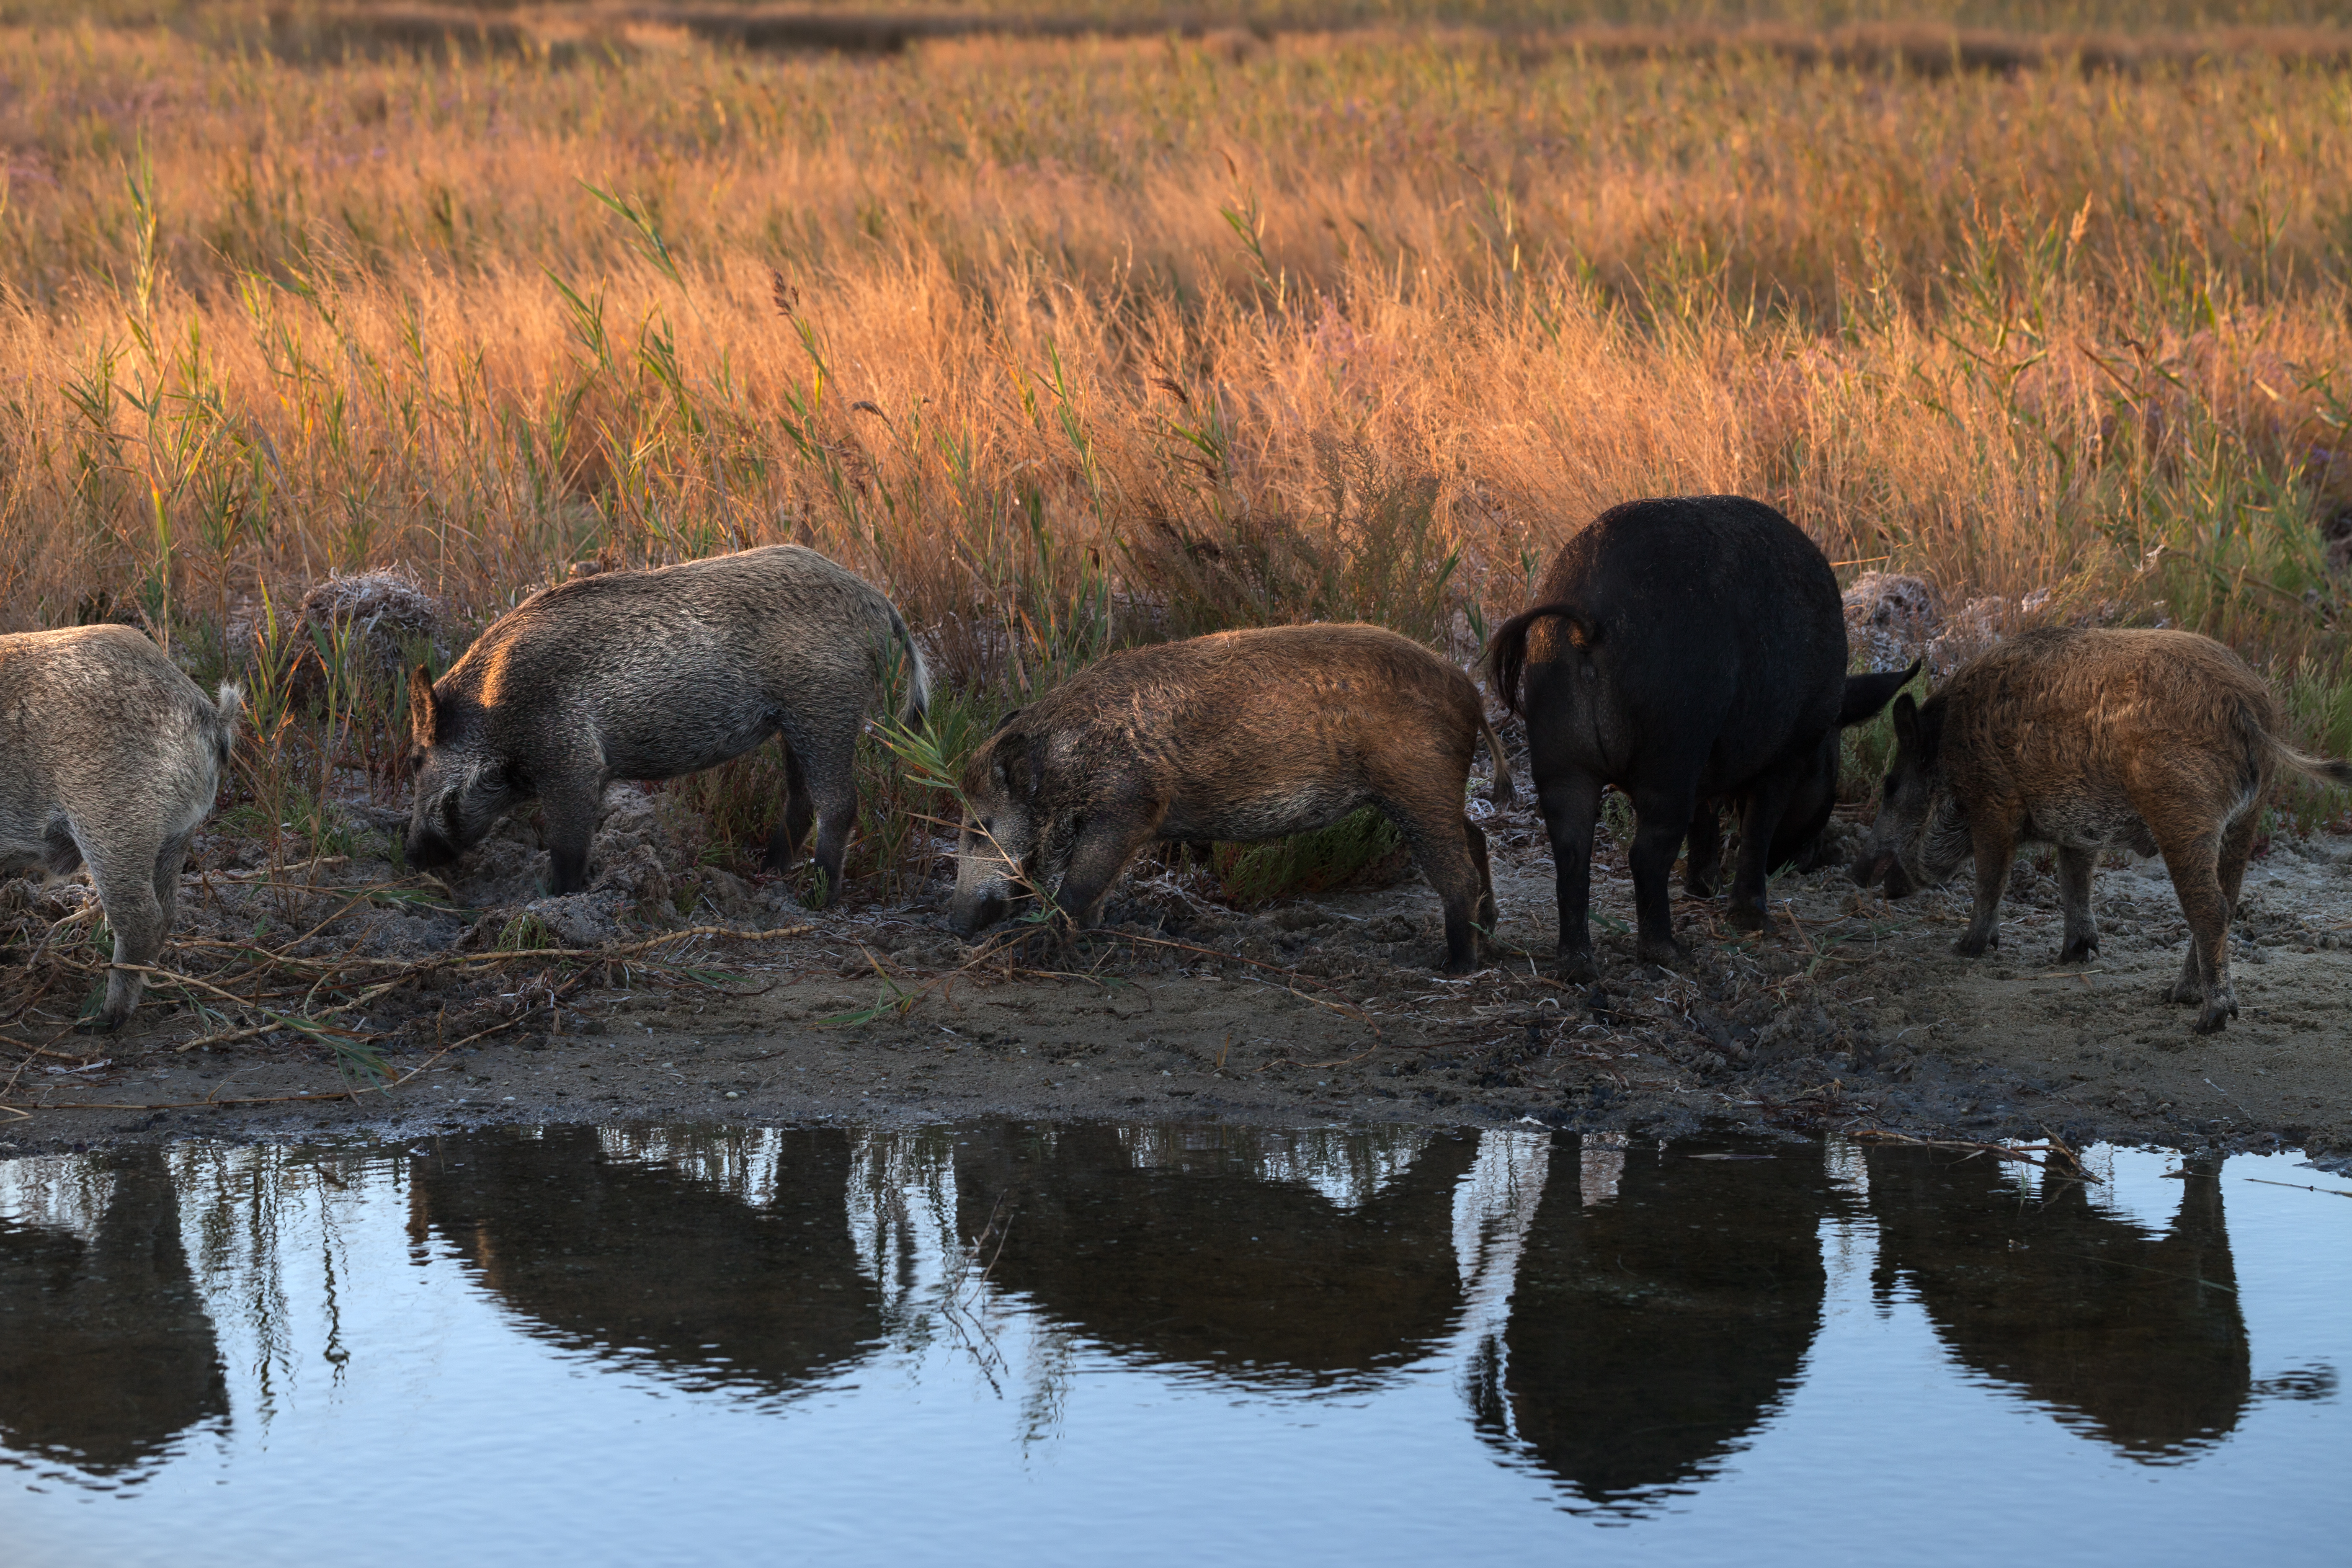 wild pigs congregate to feed around a water body